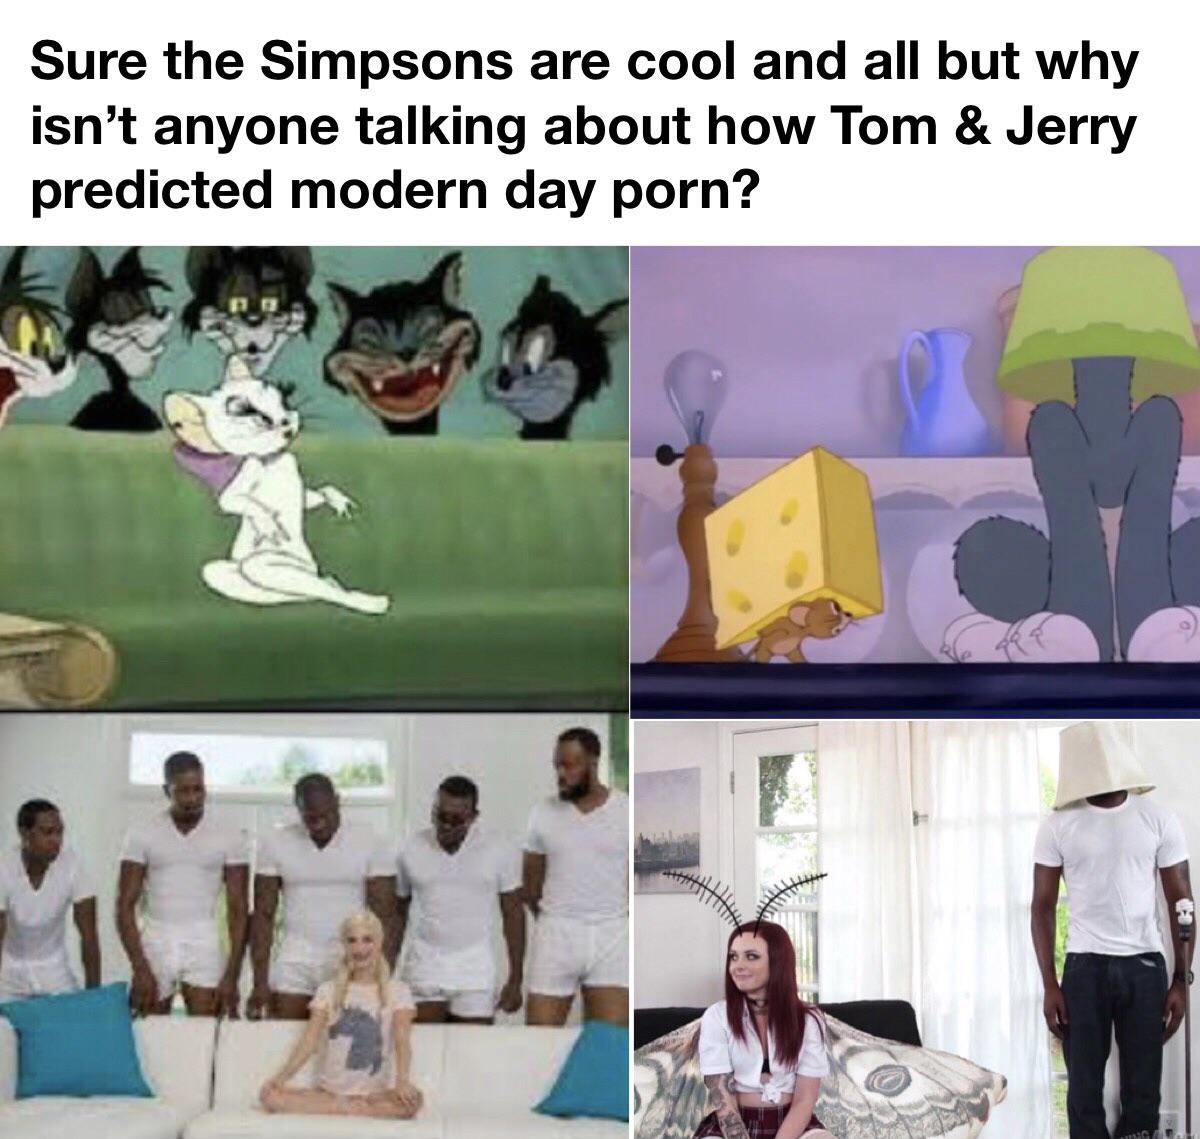 meme de piper perri - Sure the Simpsons are cool and all but why isn't anyone talking about how Tom & Jerry predicted modern day porn? c